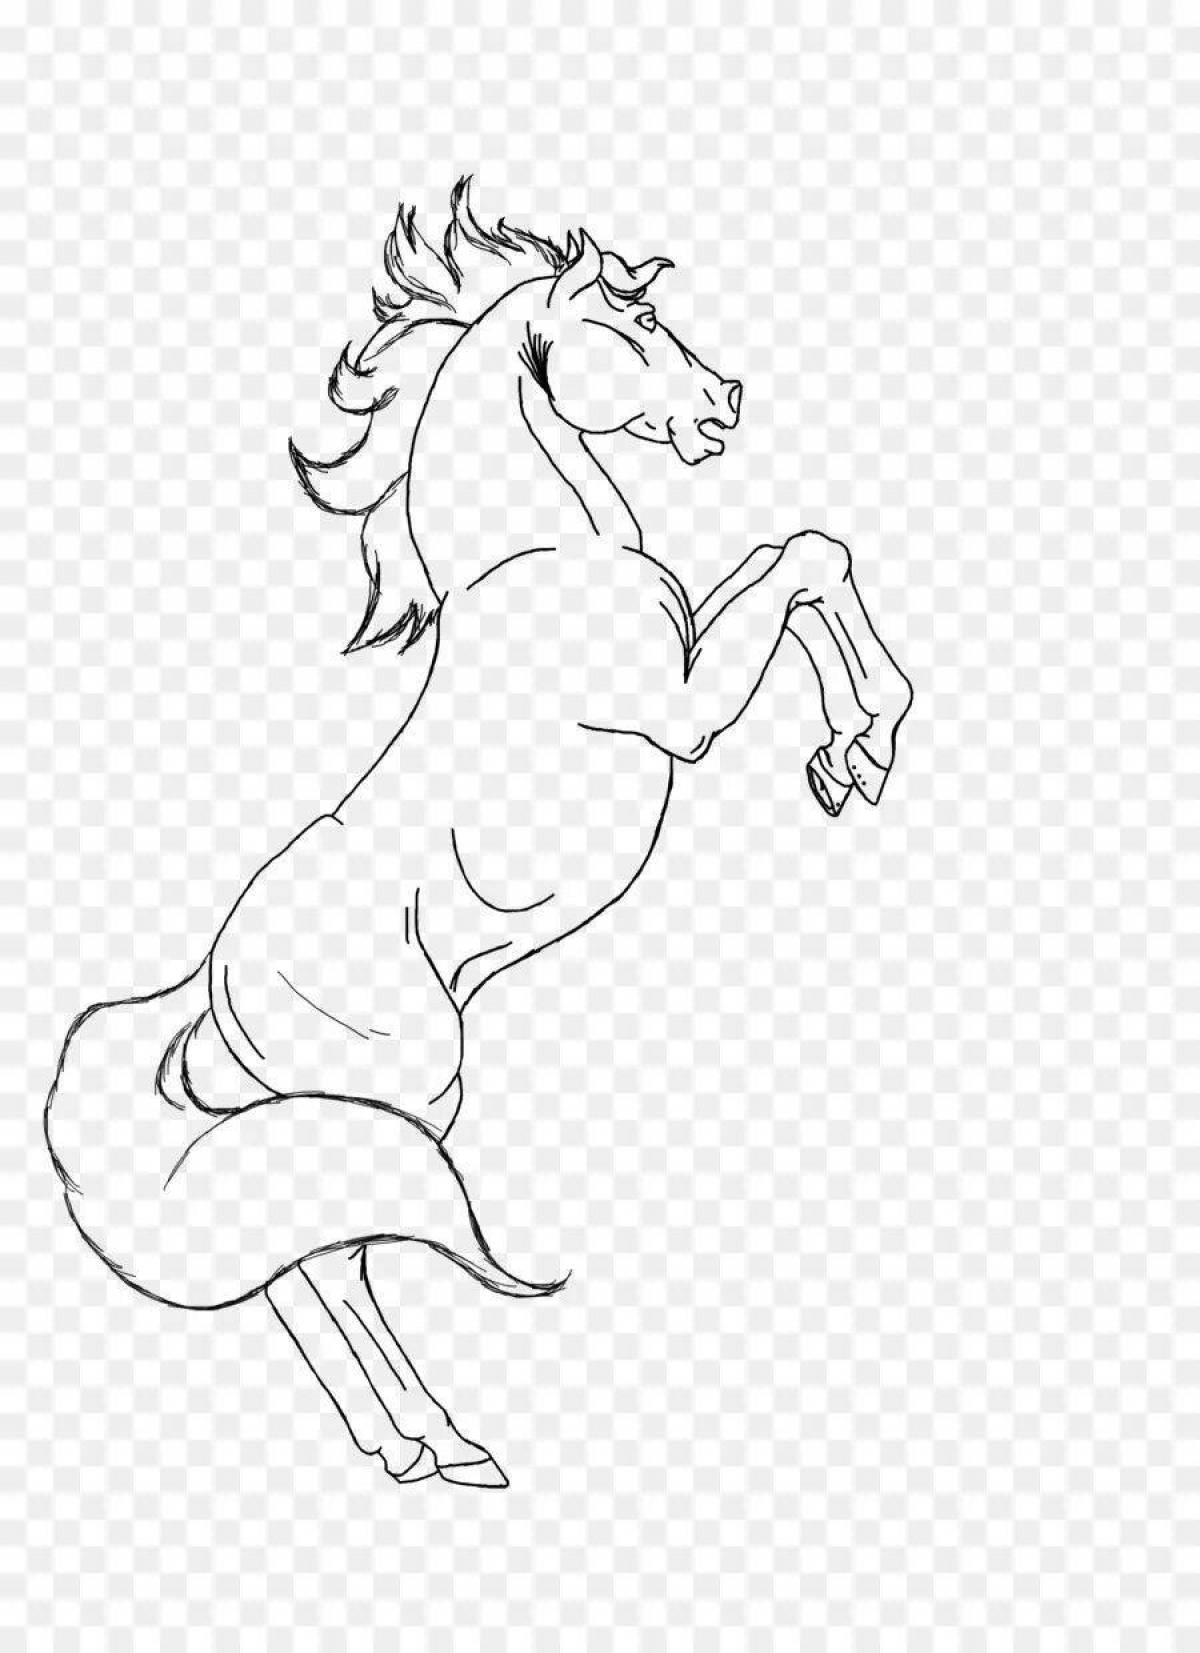 Coloring page noble rearing horse